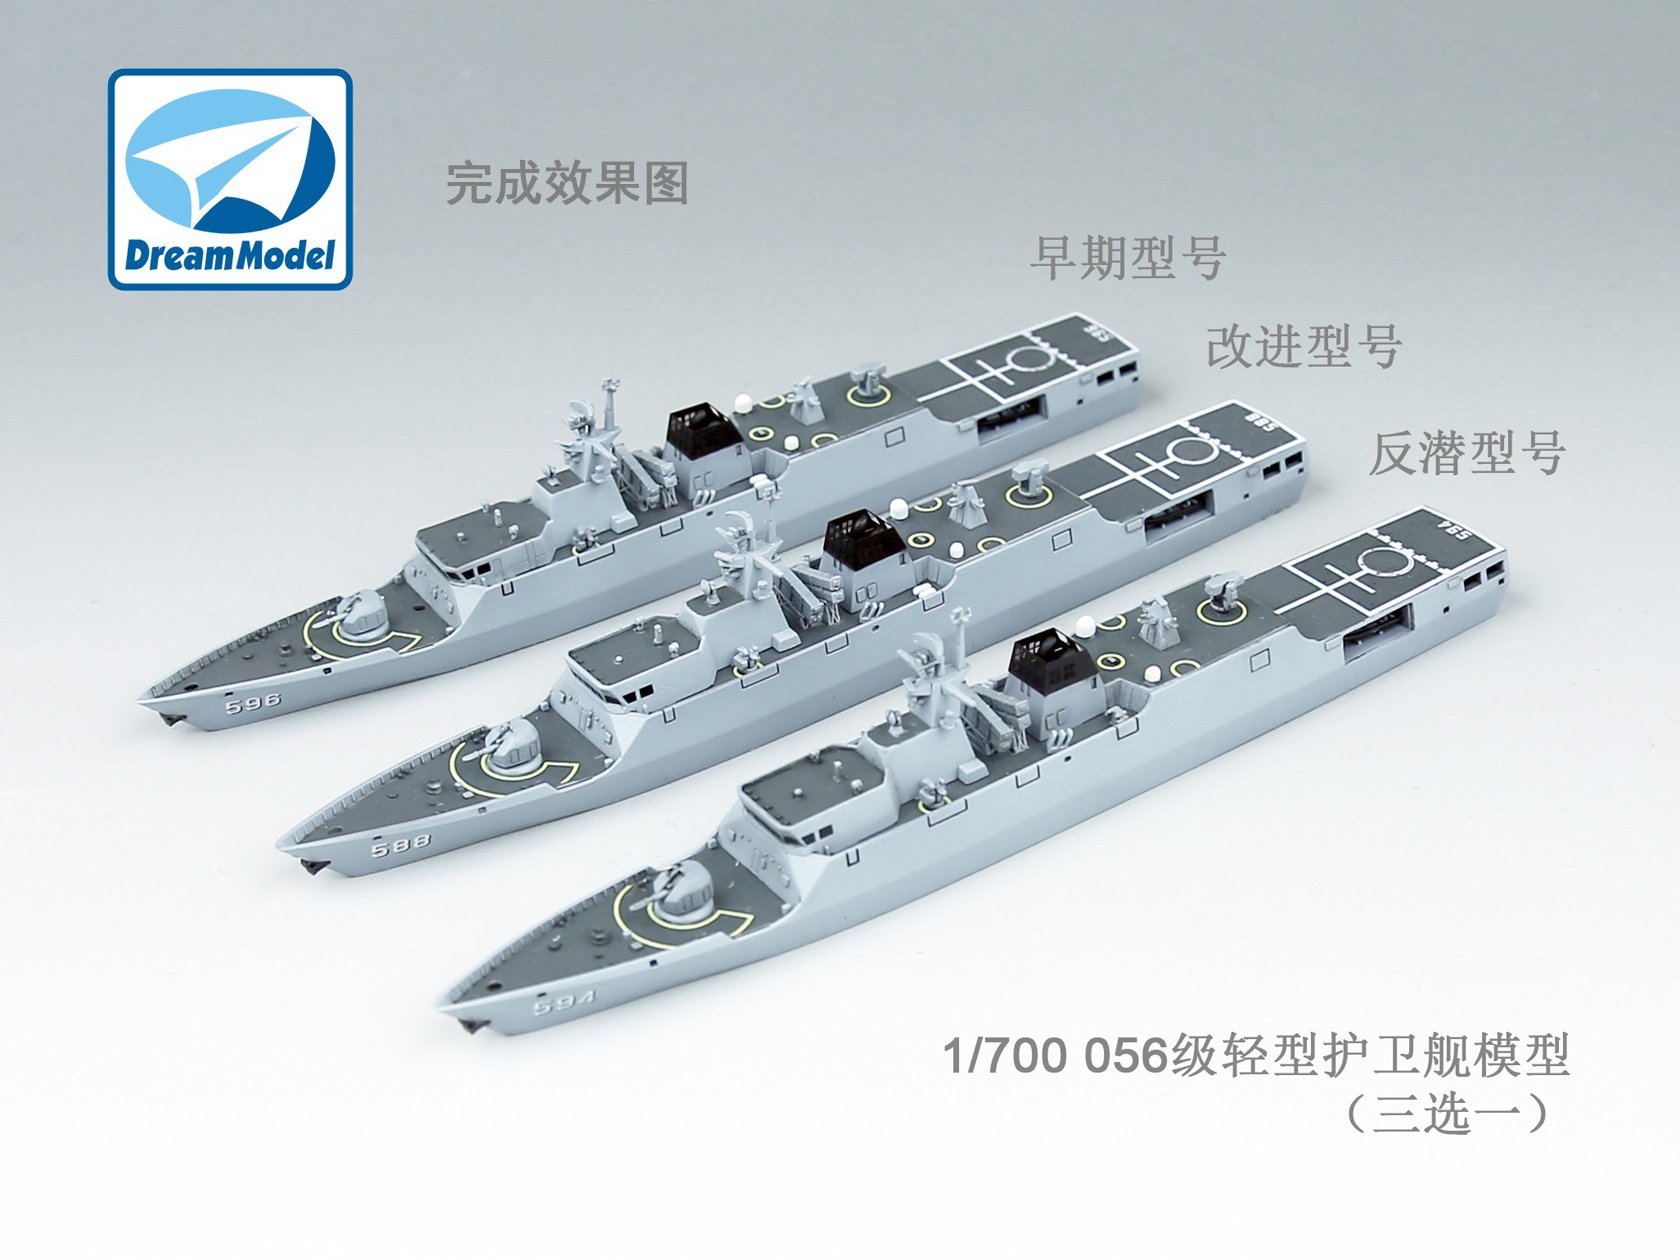 1/700 Chinese PLAN Type 056/056A Class Frigate - Click Image to Close